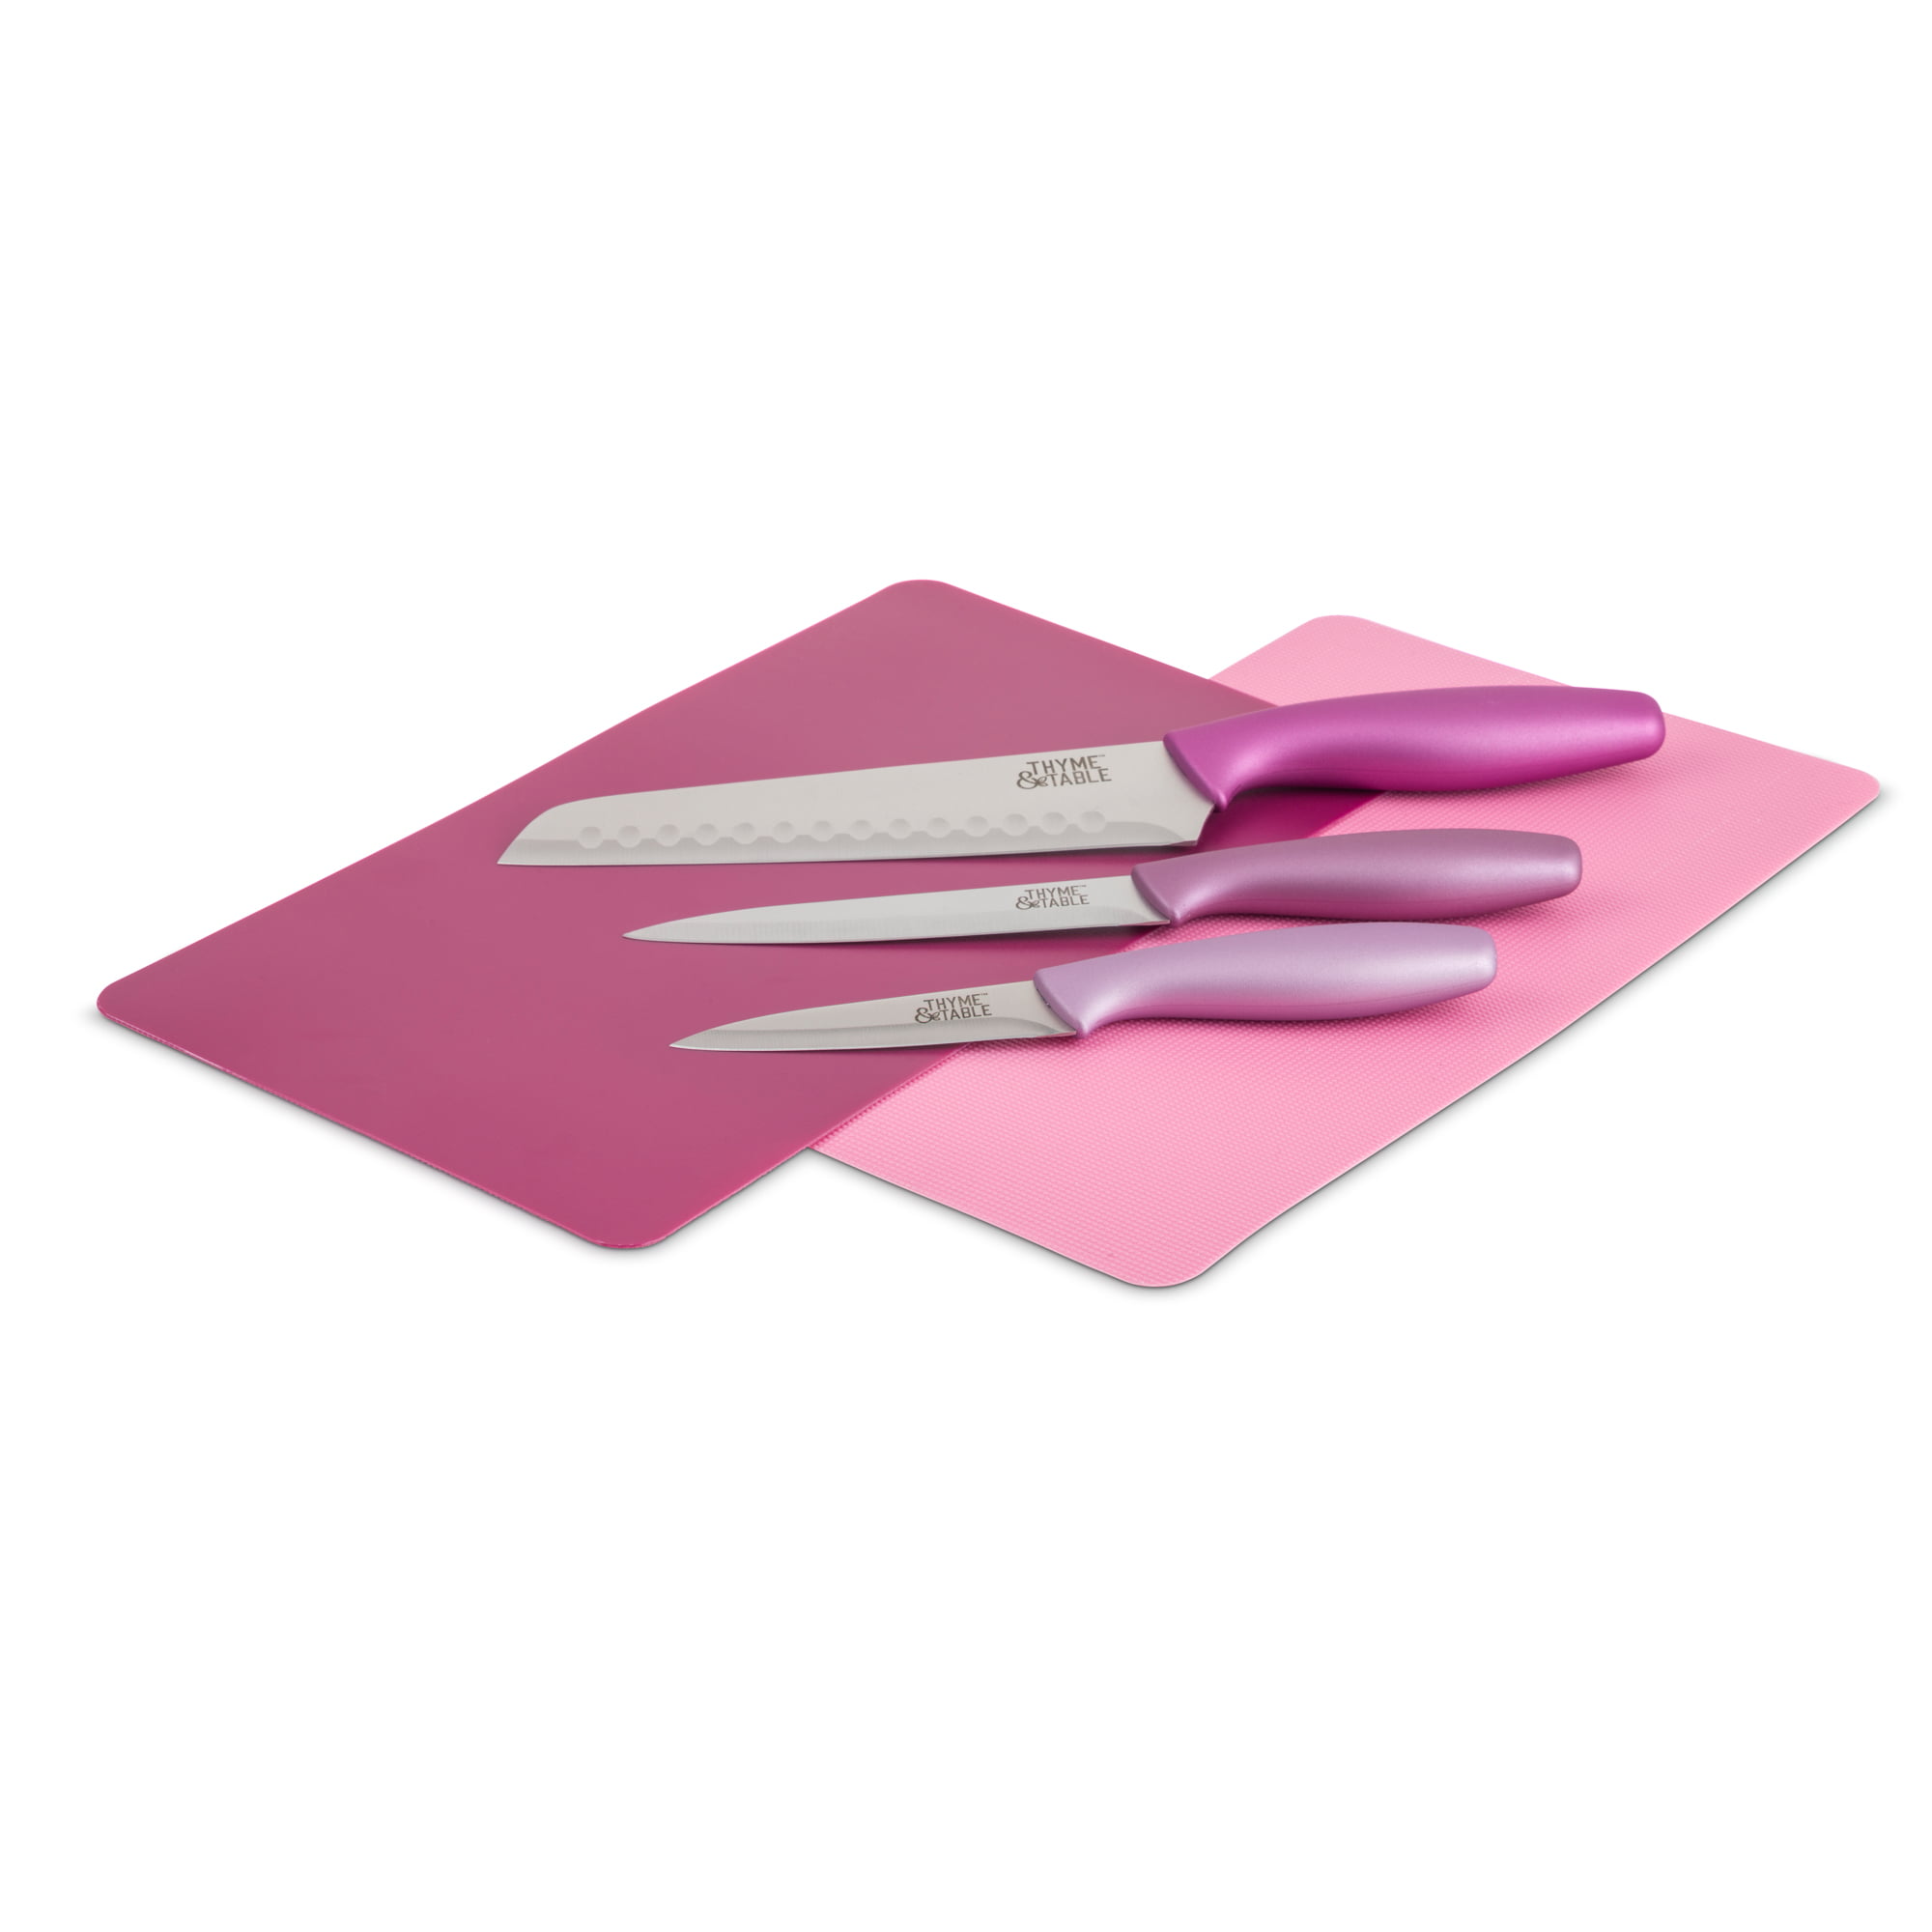 Thyme & Table Knife & Cutting Mat 5-Piece Set, Gold 